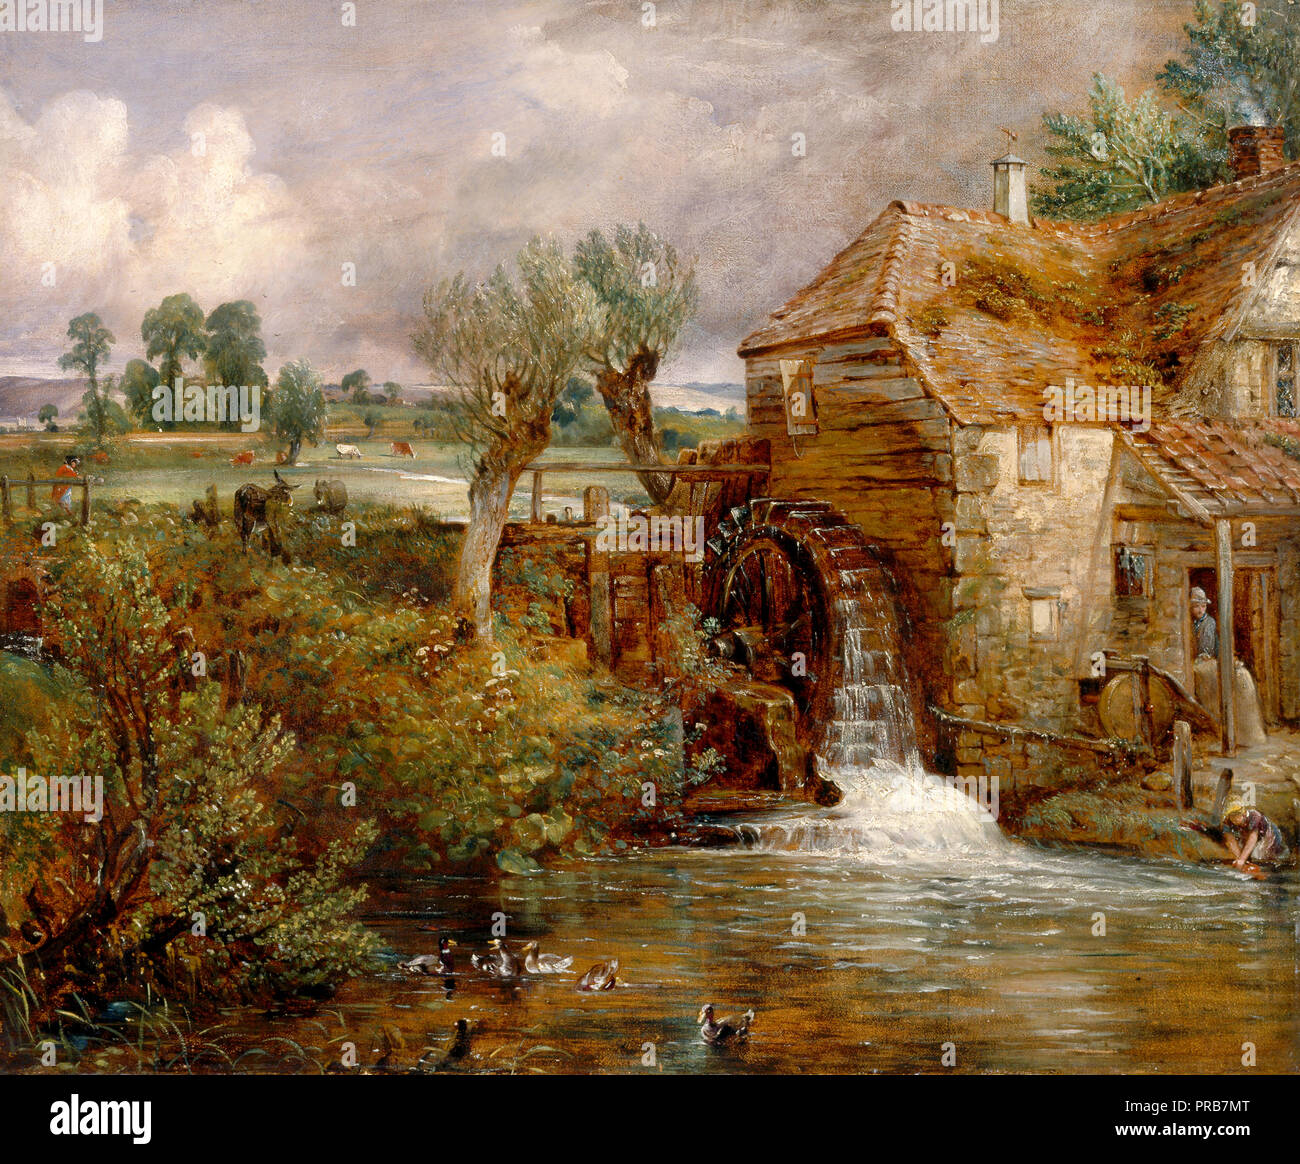 John Constable, Parham Mill, Gillingham, Circa 1826 Oil on canvas, Yale Center for British Art, New Haven, USA. Stock Photo